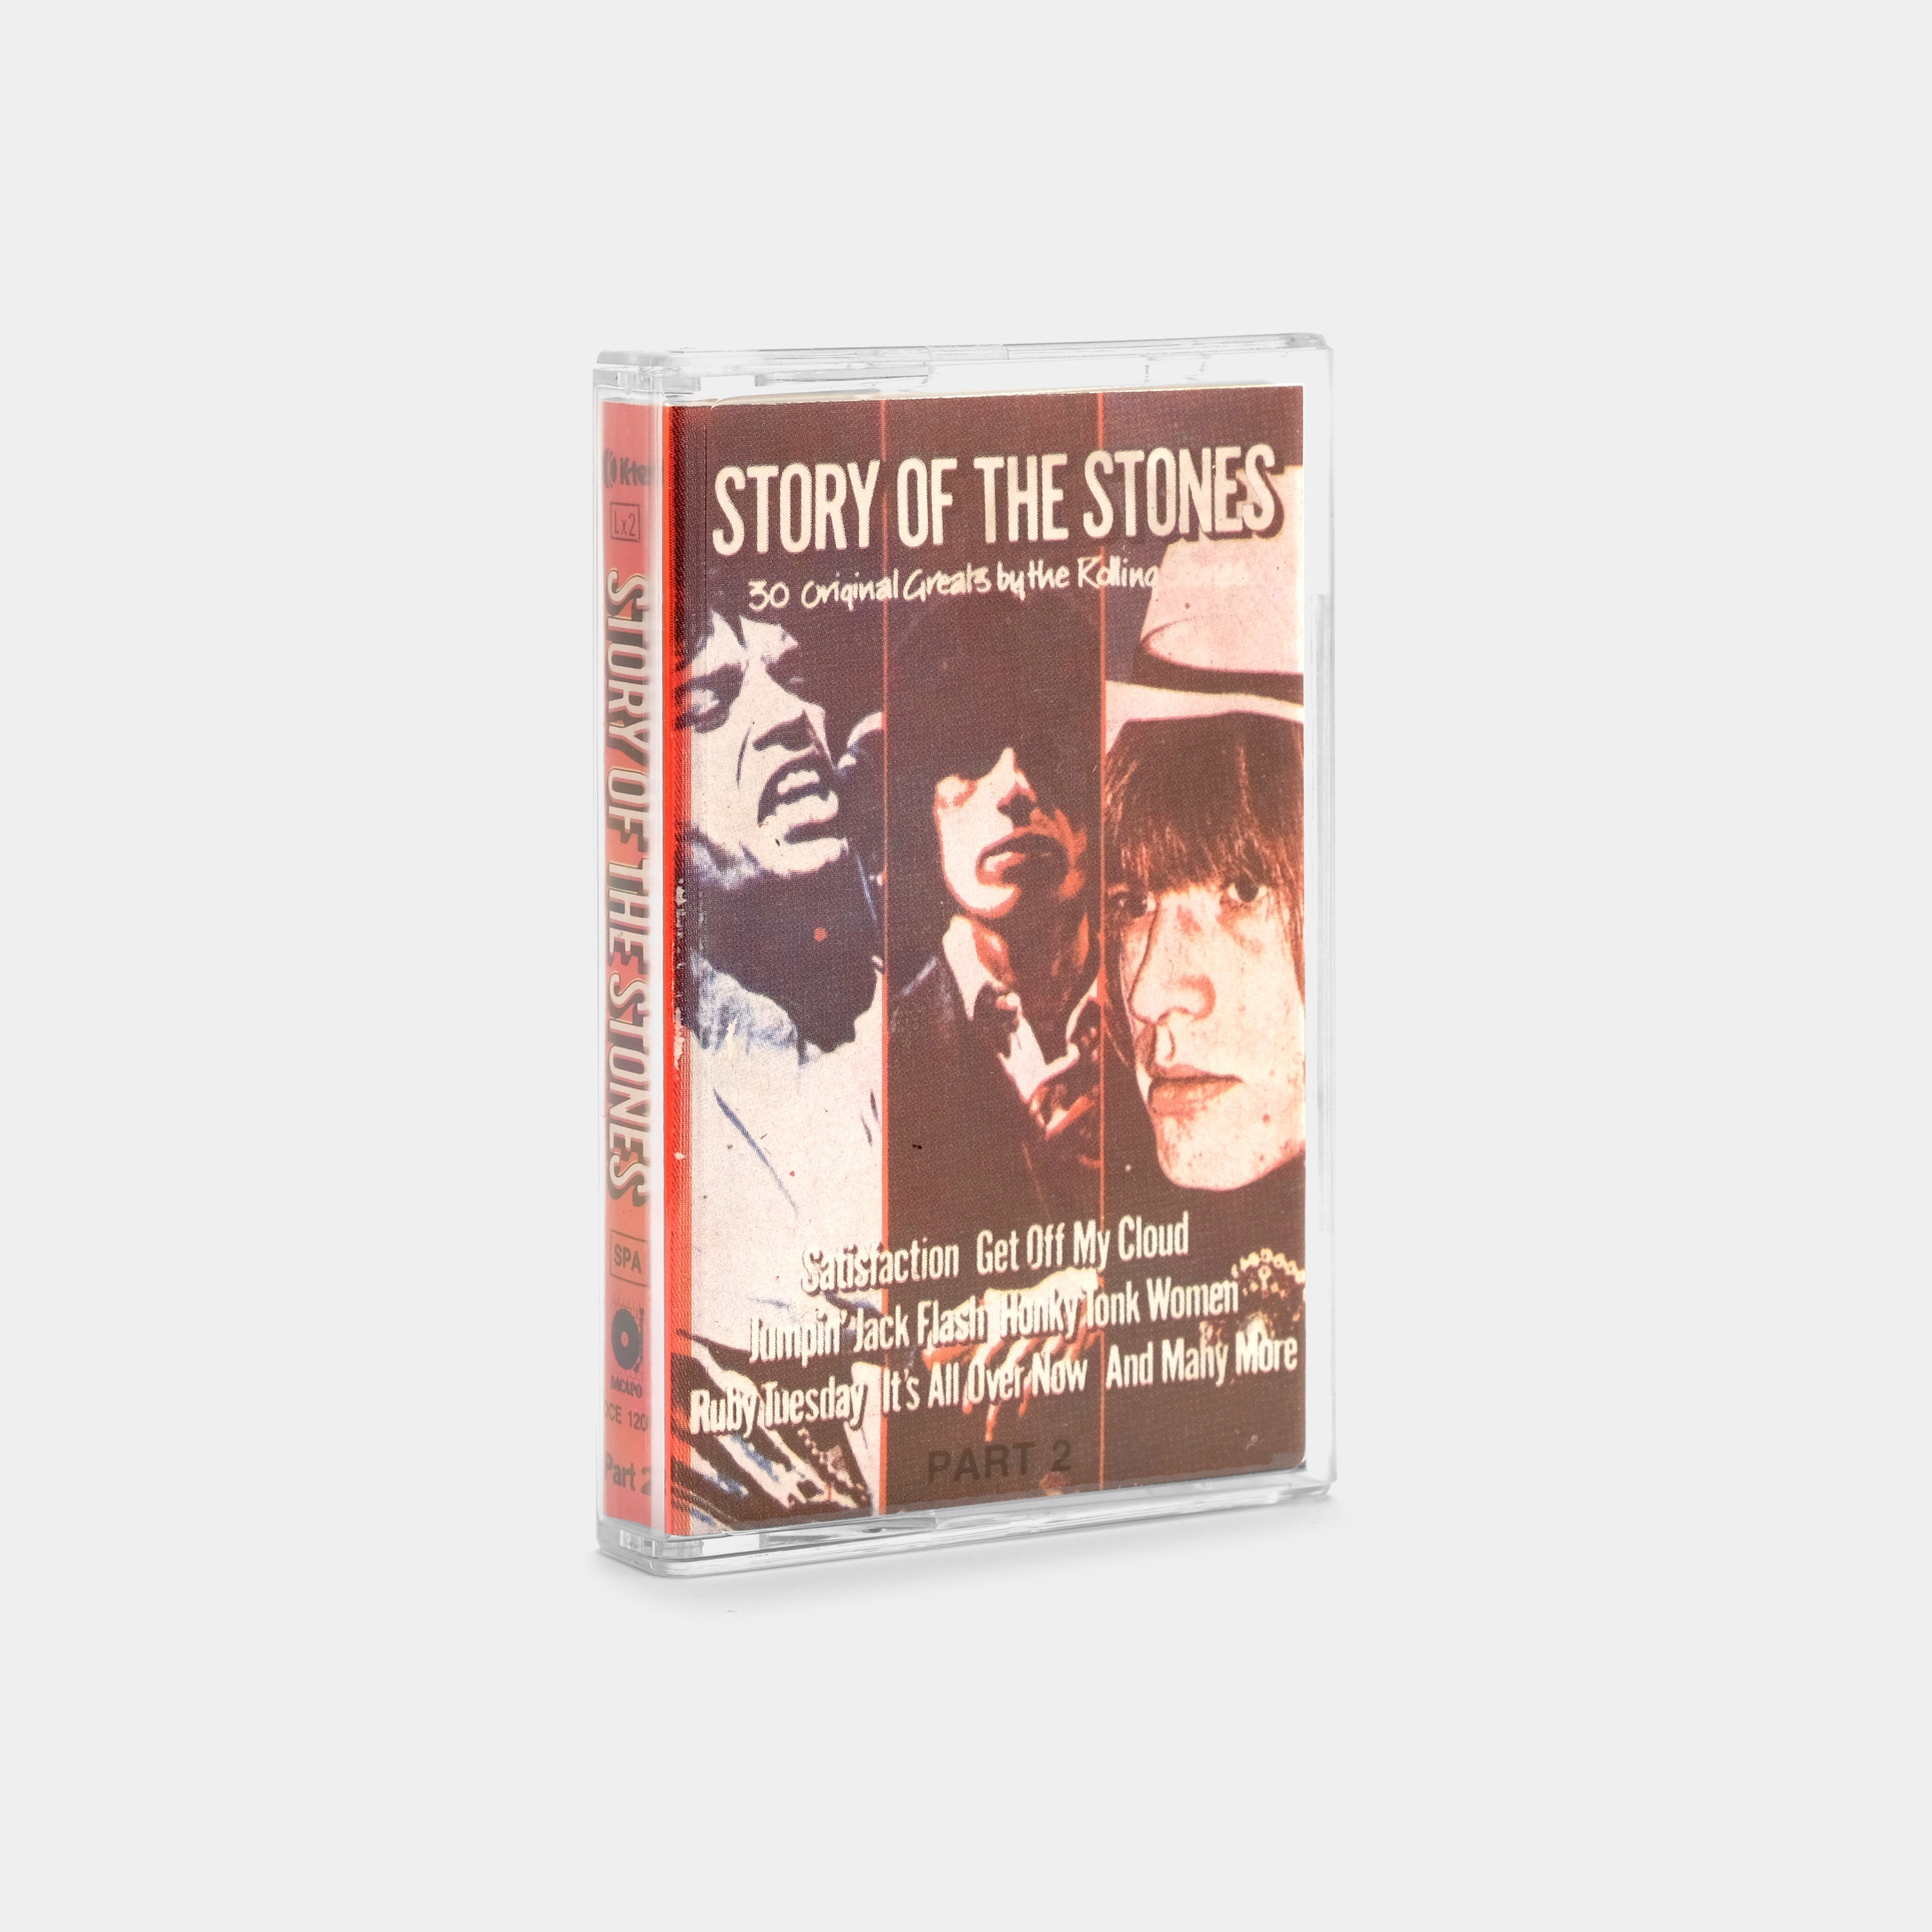 The Rolling Stones - Story of the Stones Part 2 Cassette Tape